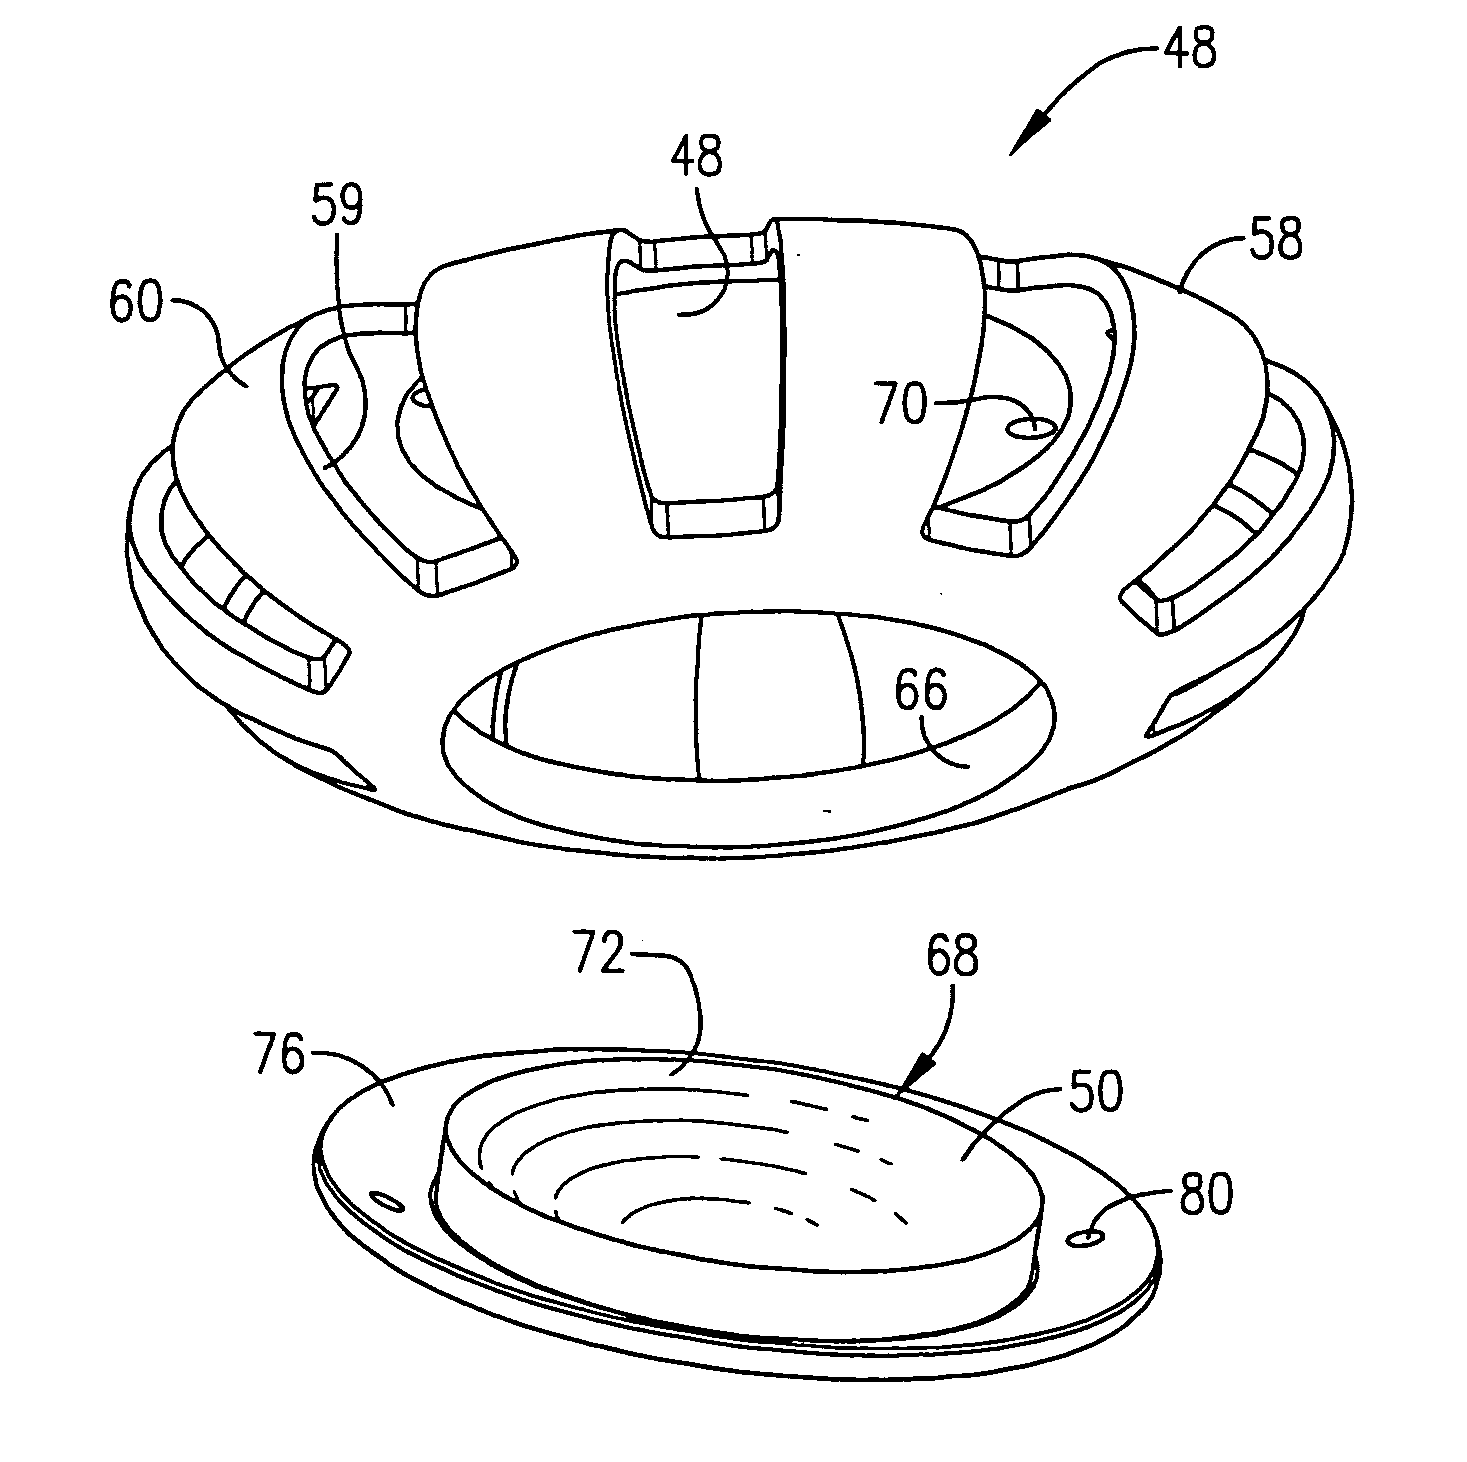 Telescopic intraocular lens implant for treating age-related macular degeneration